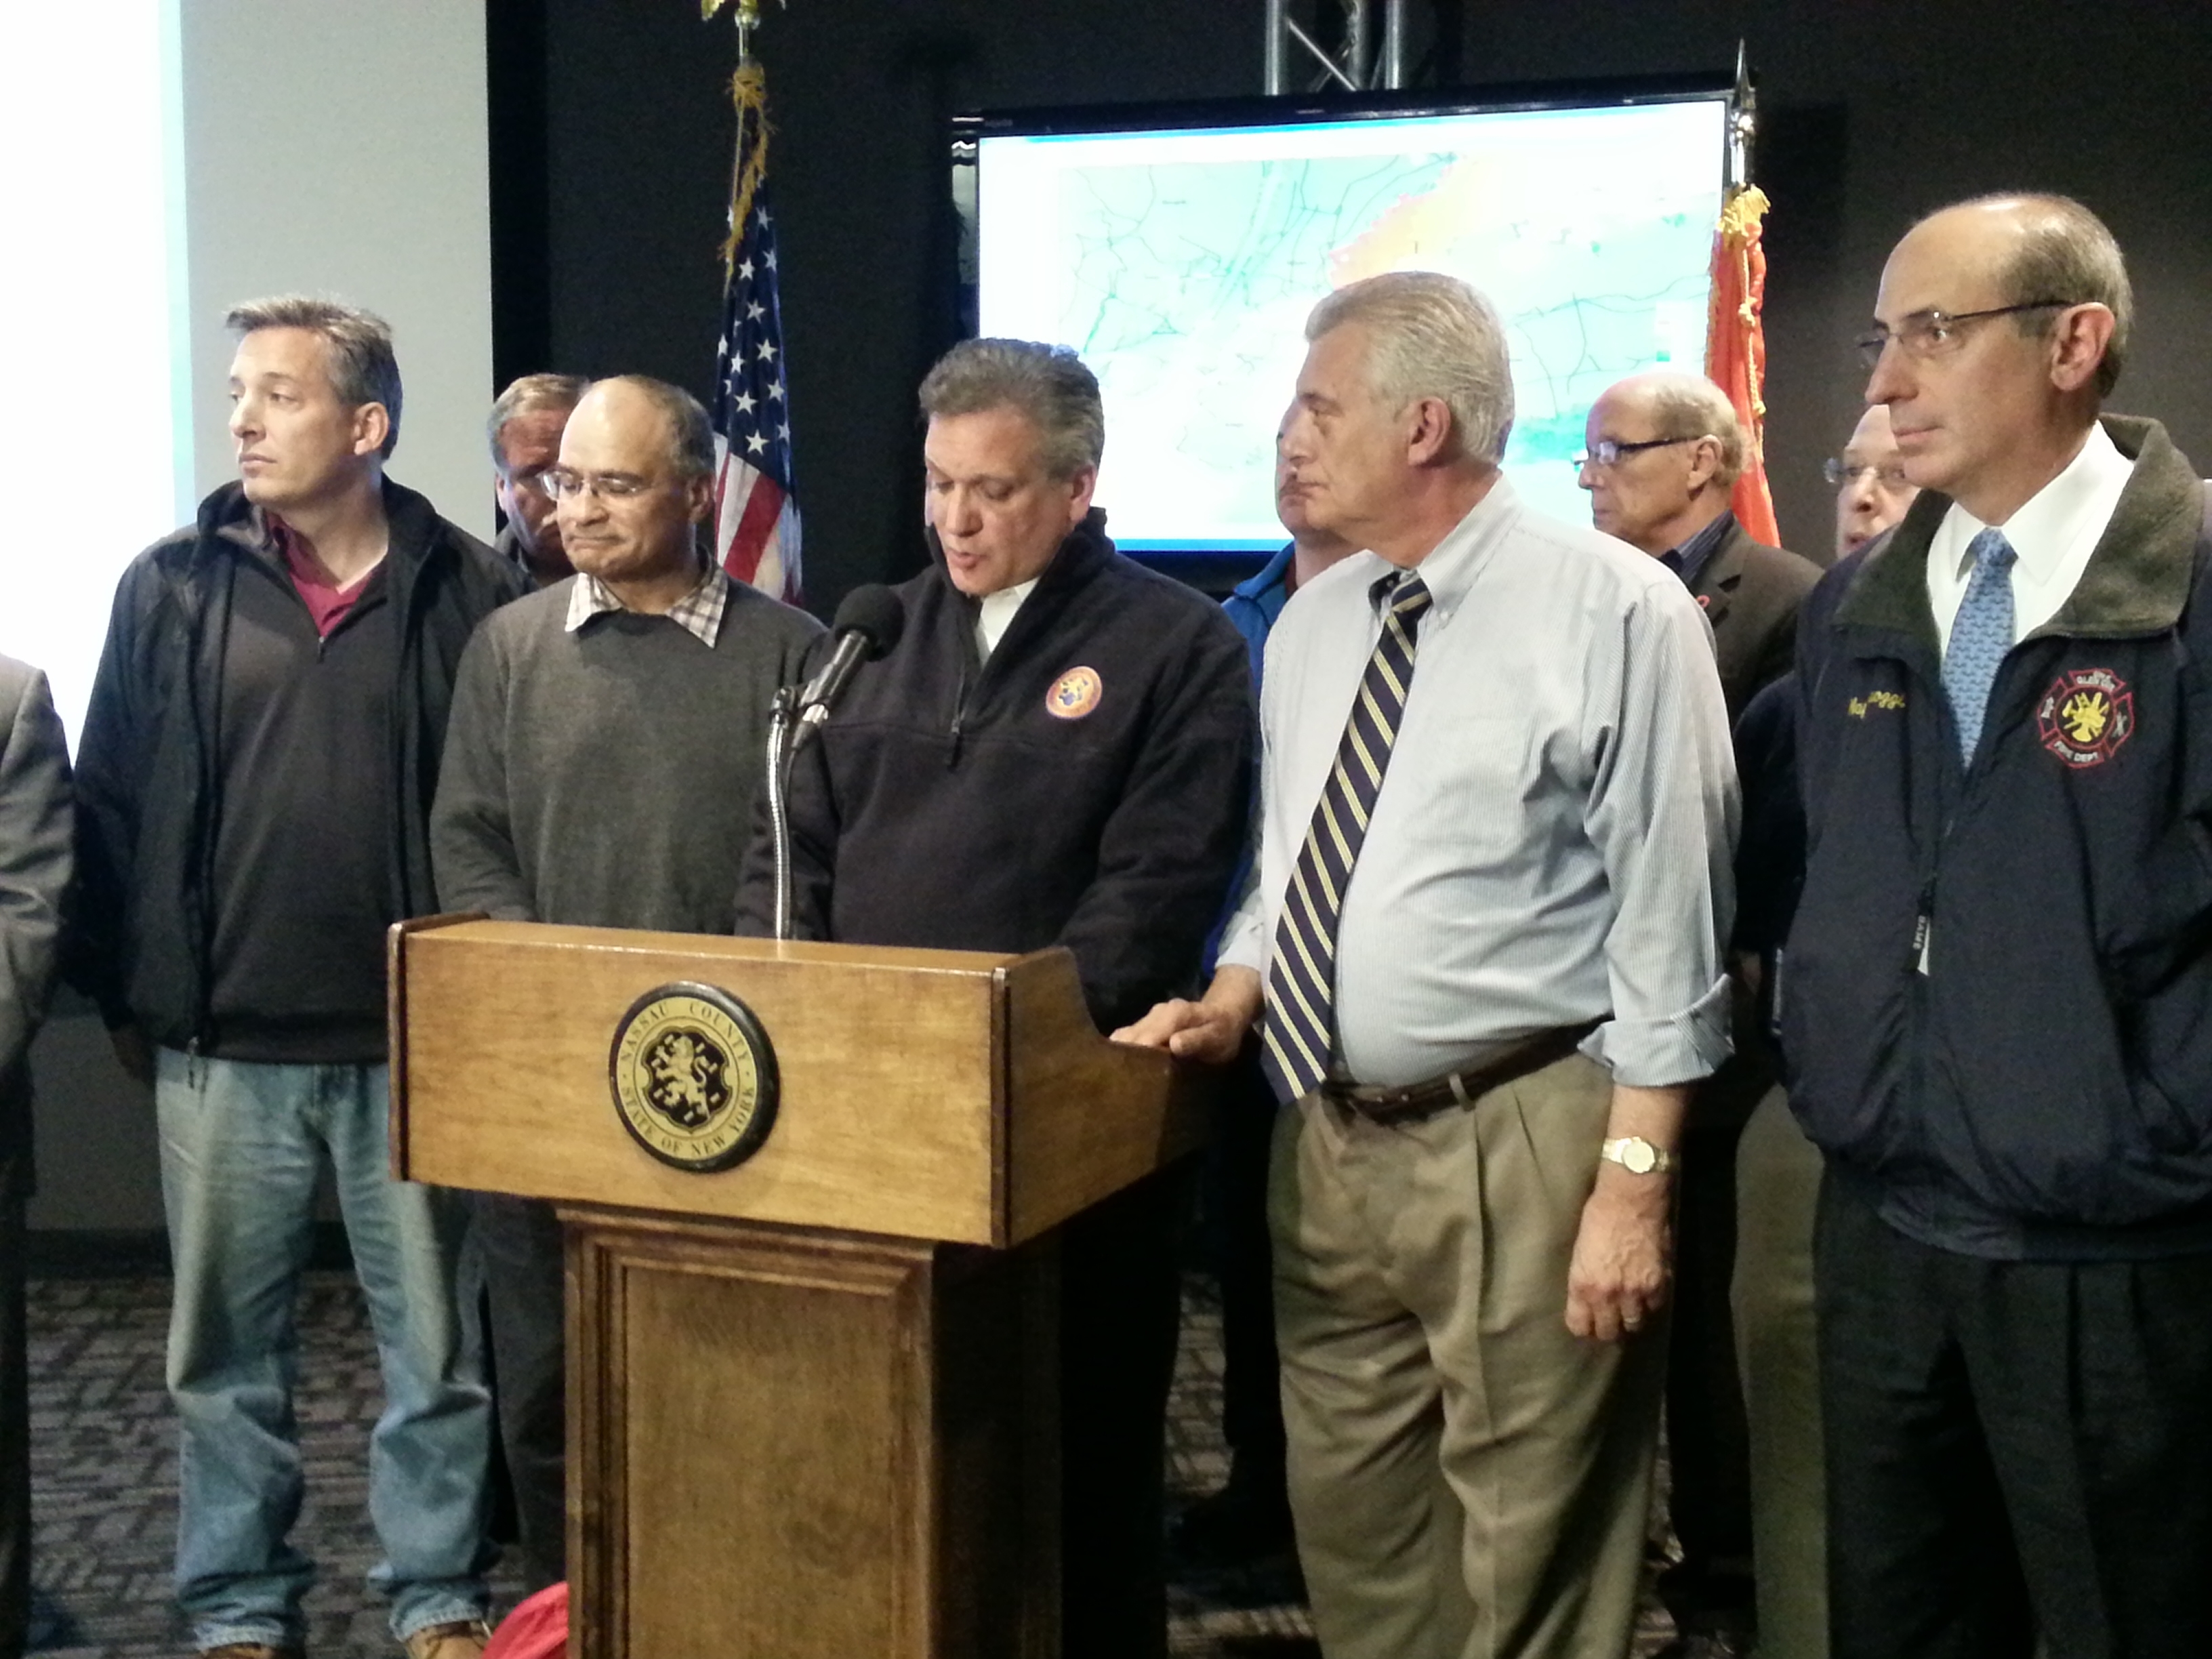 Nassau County Executive Ed Mangano (at podium) issued a State of Emergency for Nassau County Saturday Oct. 27, 2012 in anticipation of Hurricane Sandy, aka "Frankenstorm," which is expected to begin to impact Long Island Sunday, Oct. 28. (Rashed Mian/Long Island Press)